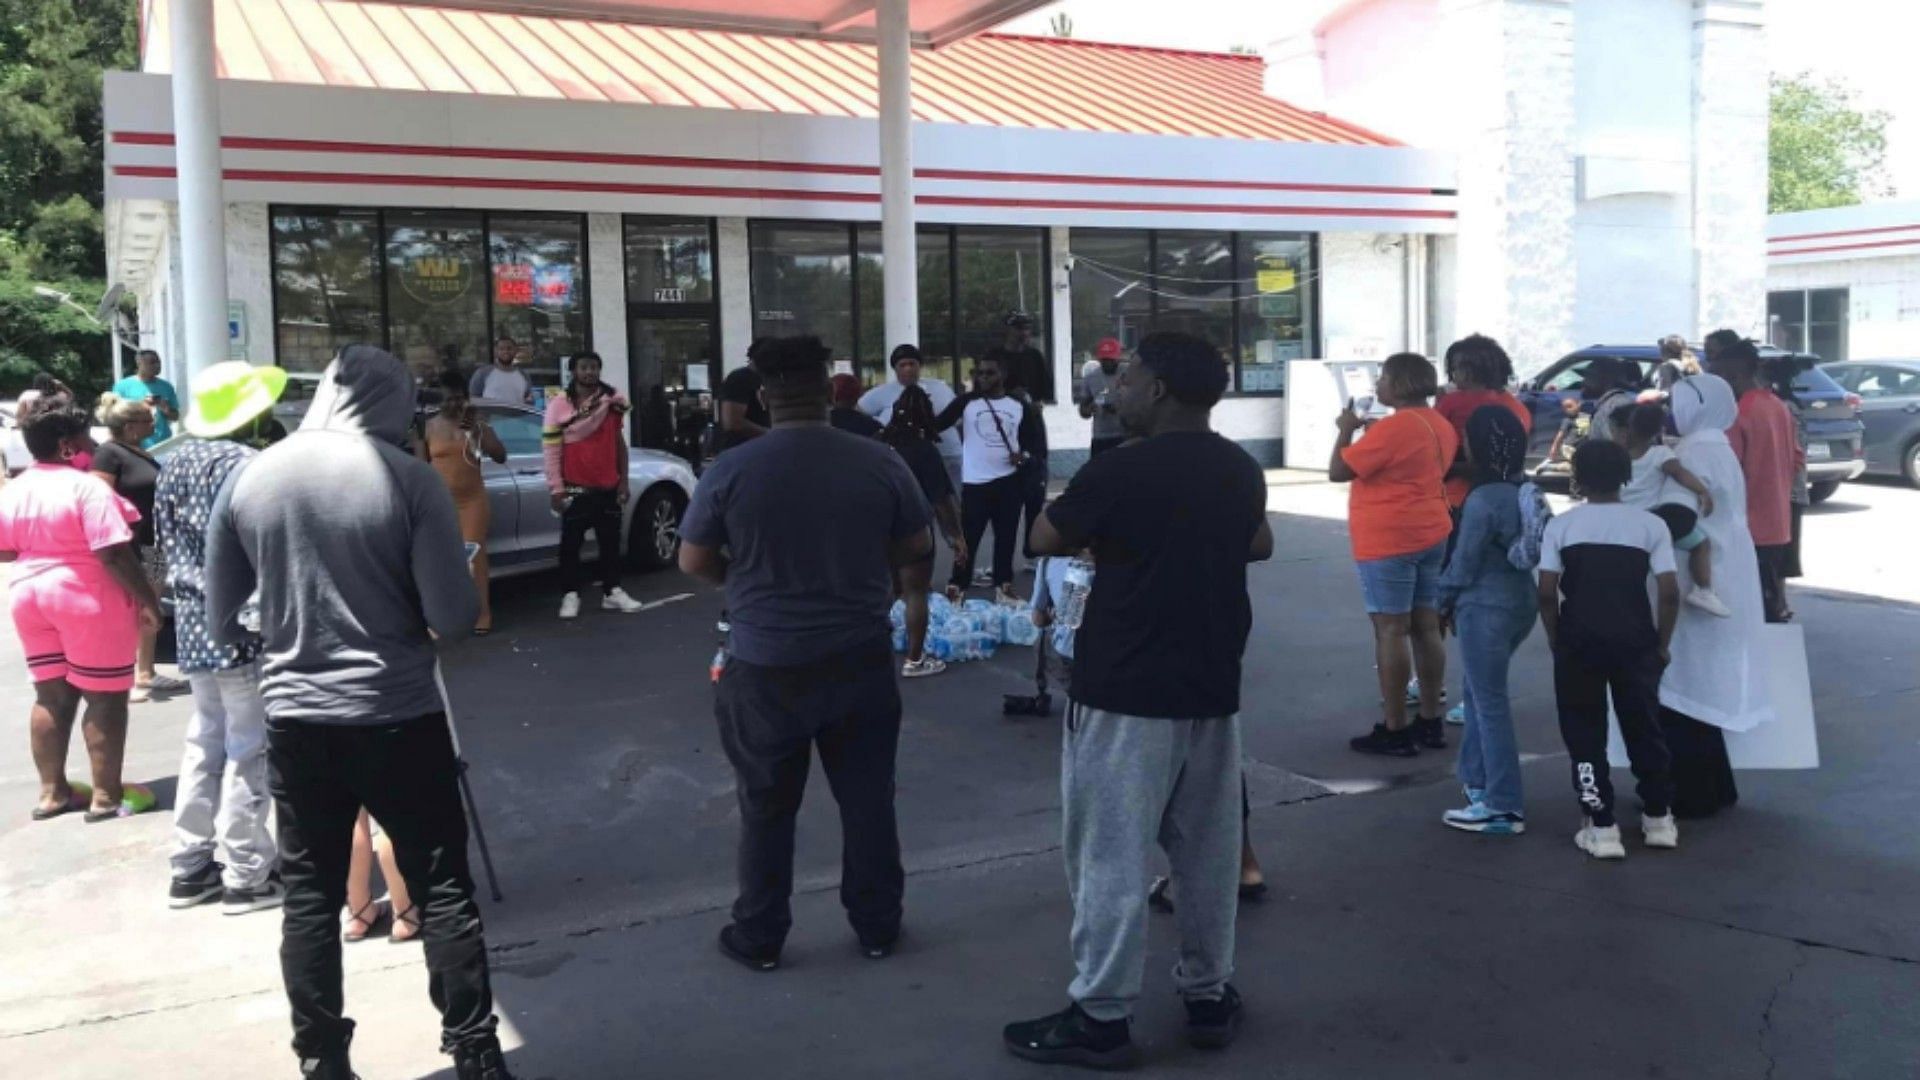 People gather outside gas station after 14-year-old gunned down by store owner (Image via Southern Man/Twitter)